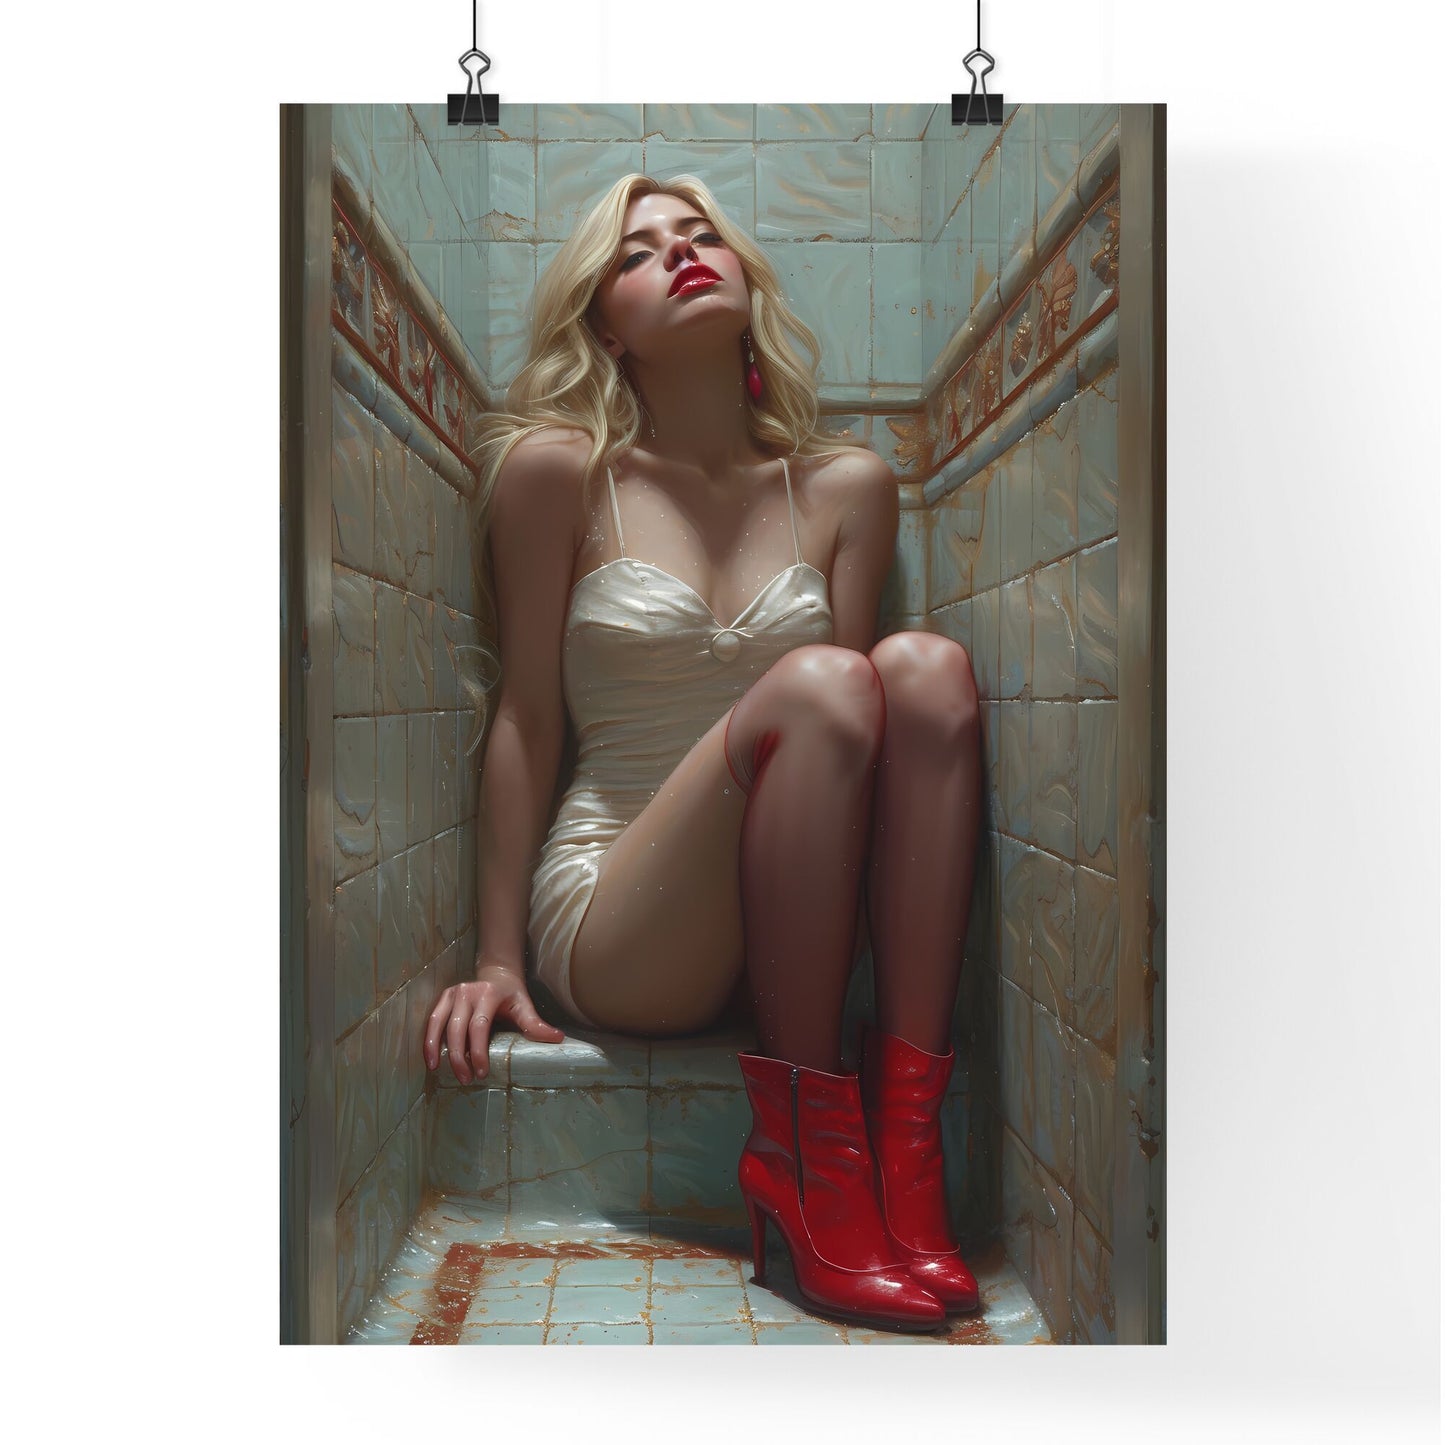 Blonde pin up girl in stockings with red high heels aviation style - Art print of a woman sitting on a tile floor Default Title